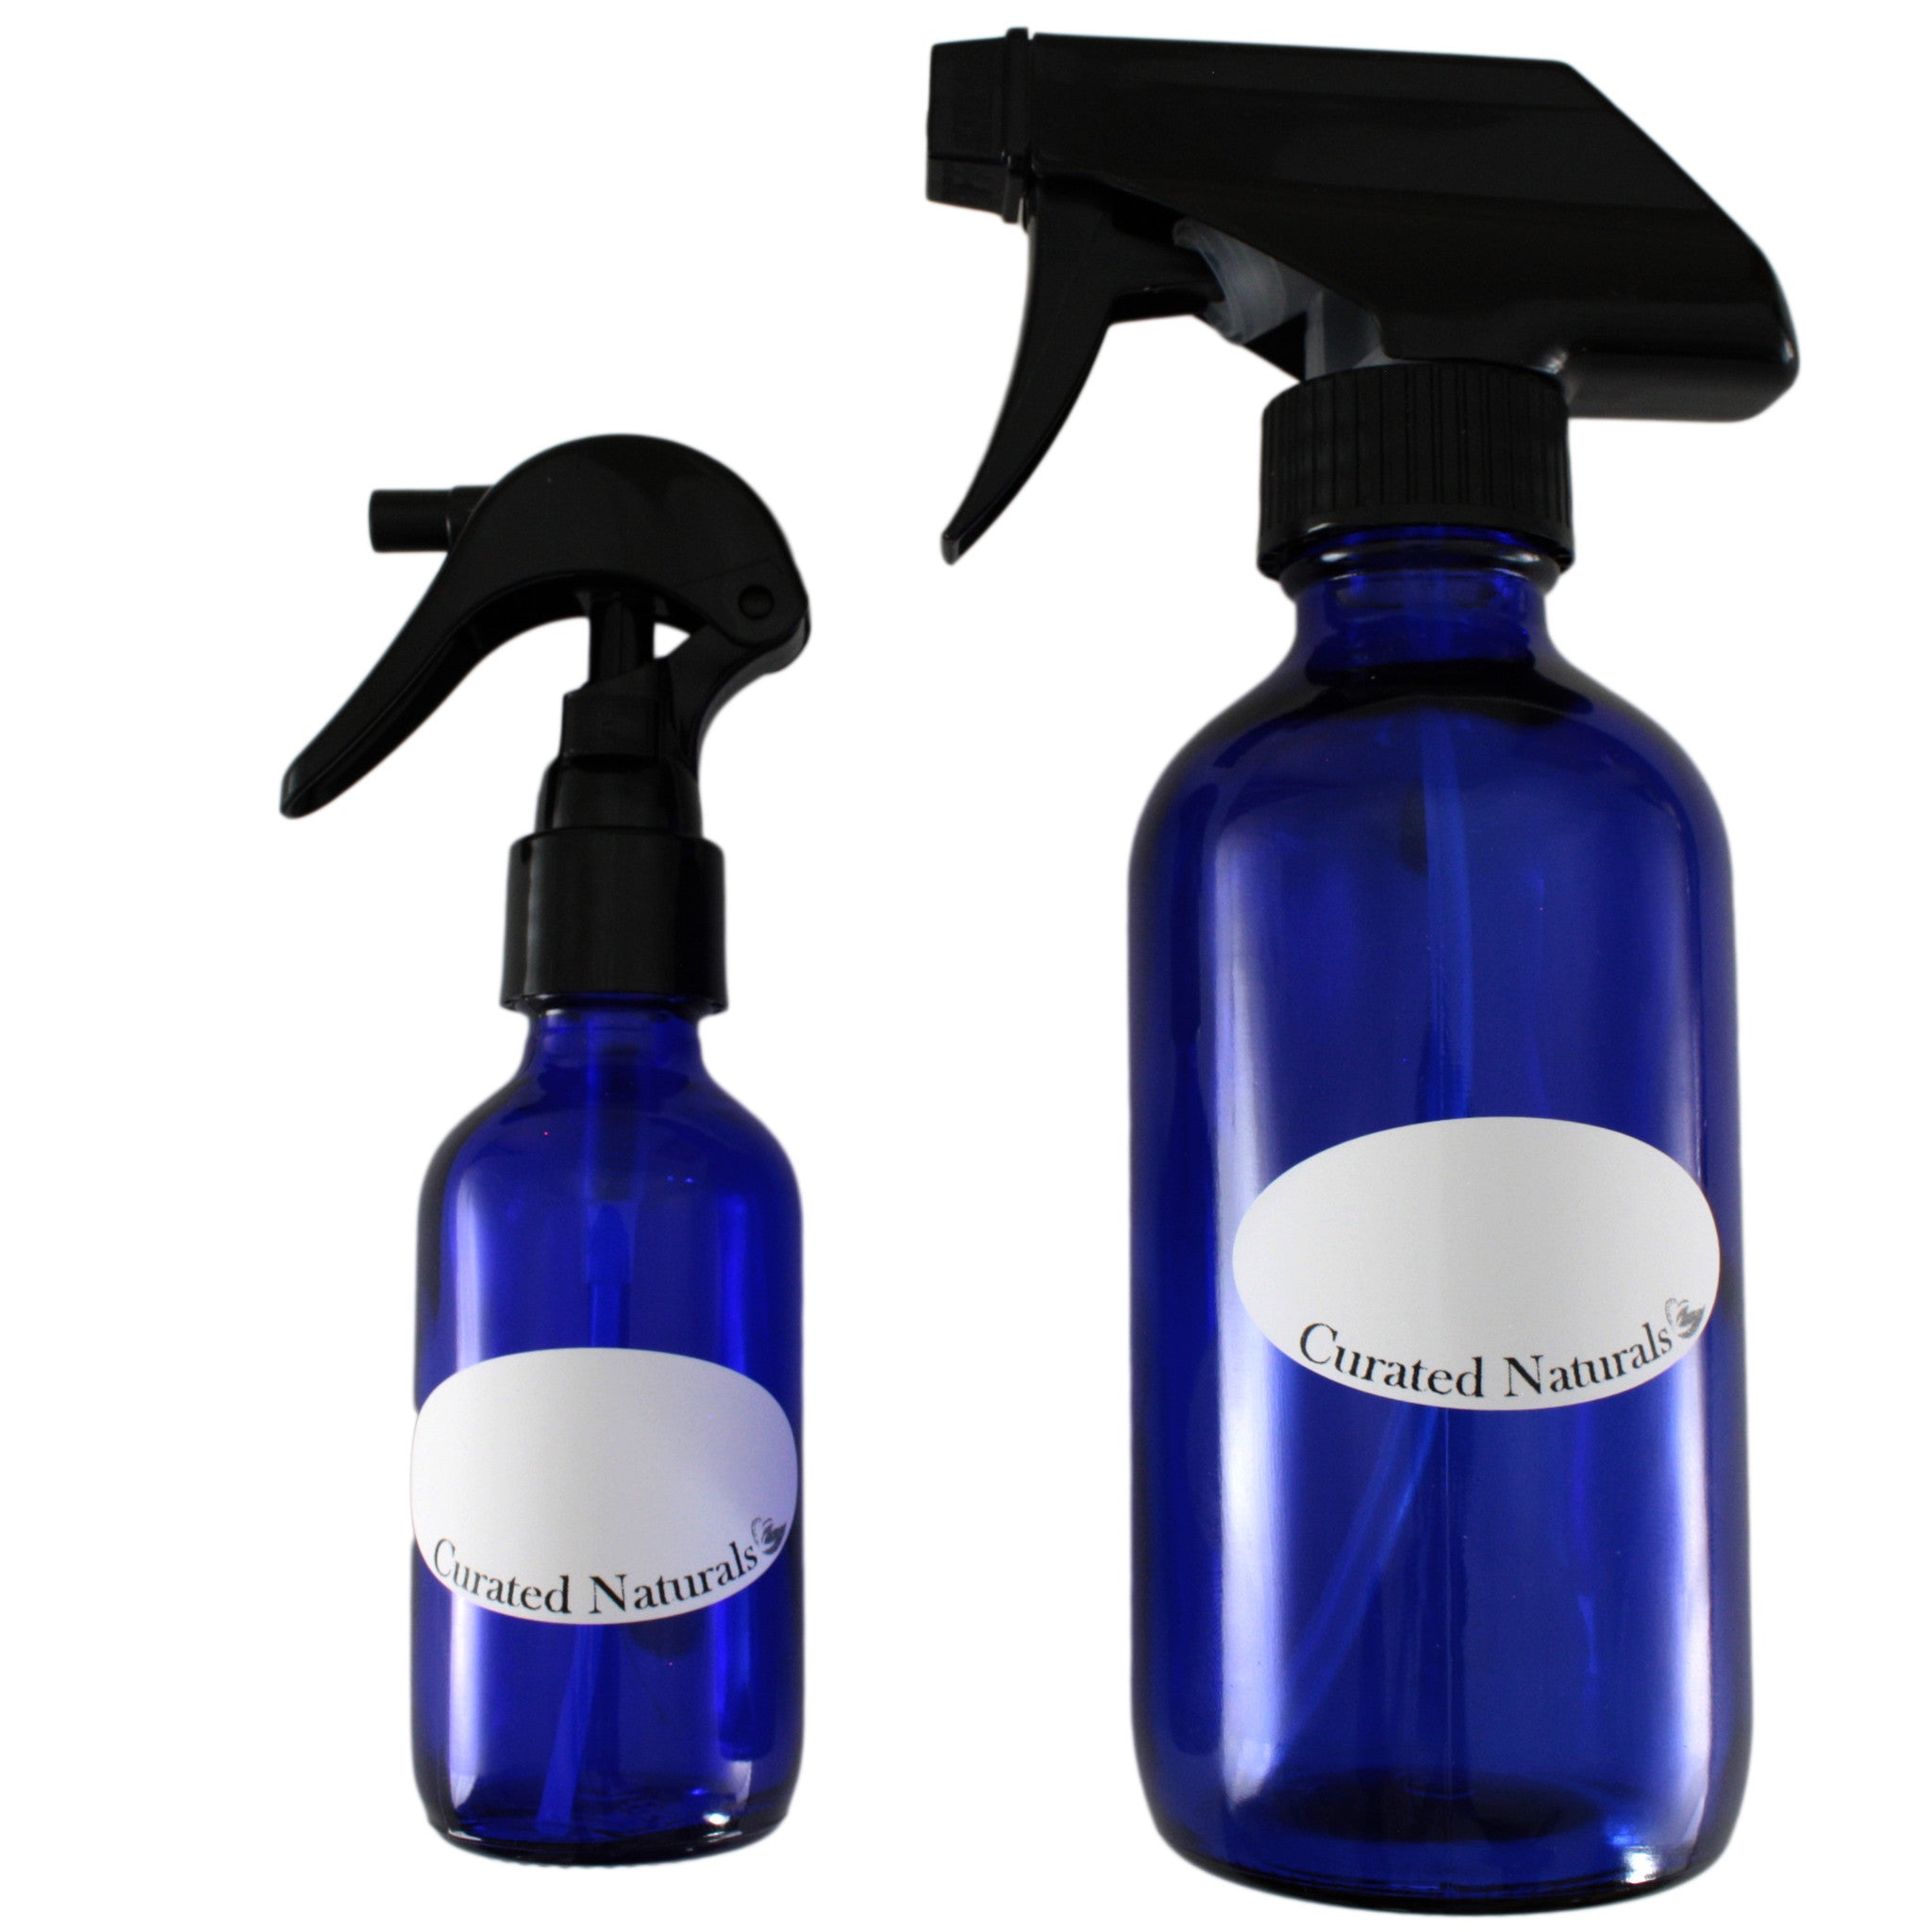 High Quality Essential Oil blue glass Spray Bottles two pack. 2 ounce, -  Curated Naturals